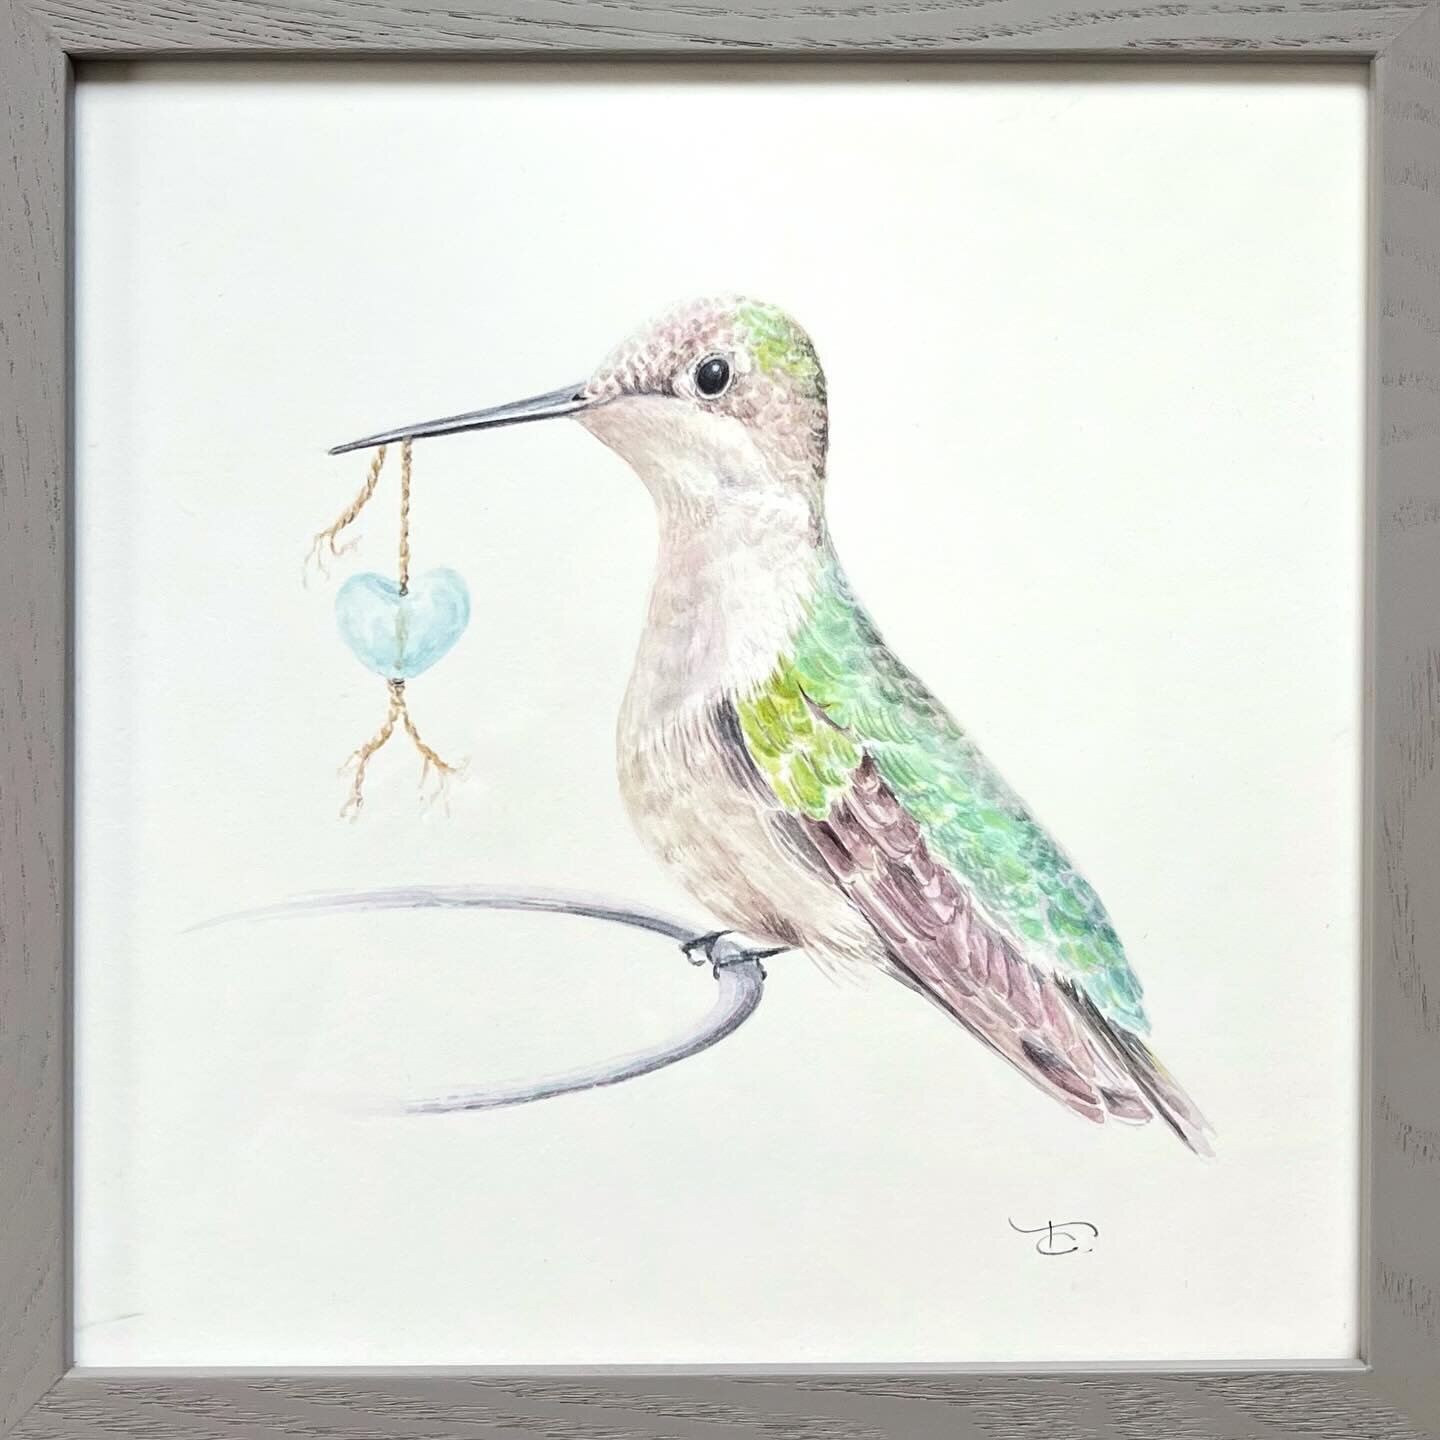 This sweet little 10x10 framed watercolor will be at the Works of the HeART show at our fabulous local shop @nativescituate starting today and running for the next couple of weeks 🩵 
.
.
&lsquo;Glass Heart&rsquo; (w/ female Ruby-throated Hummingbird